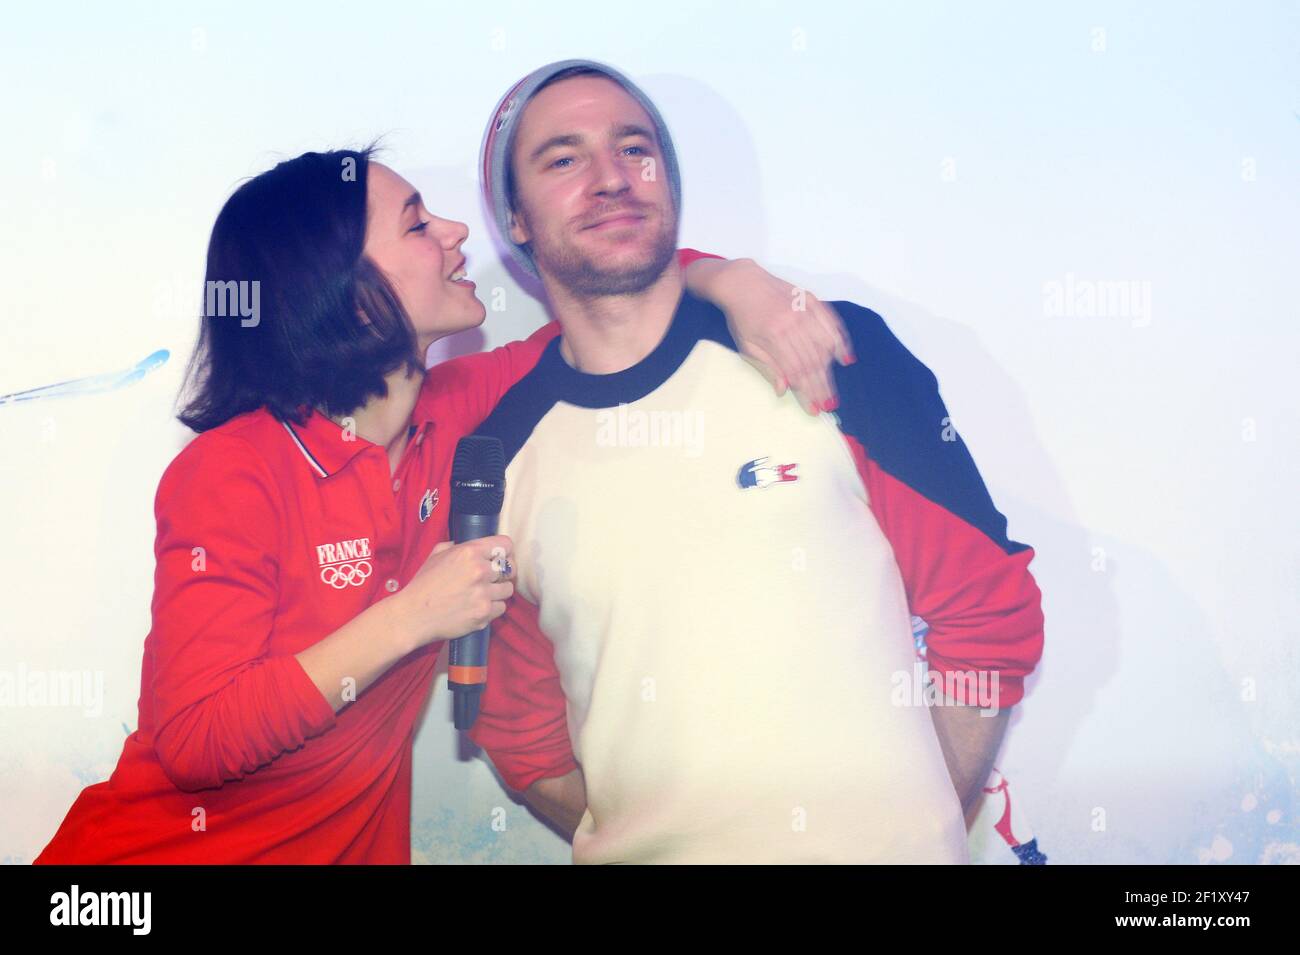 Medals party at the Club France, the ice dance skaters Nathalie Pechalat and Fabien Bourzat from France during the XXII Winter Olympic Games Sotchi 2014, at Club France, February 18, 2014 in Sochi, Russia. Photo Pool KMSP / DPPI Stock Photo